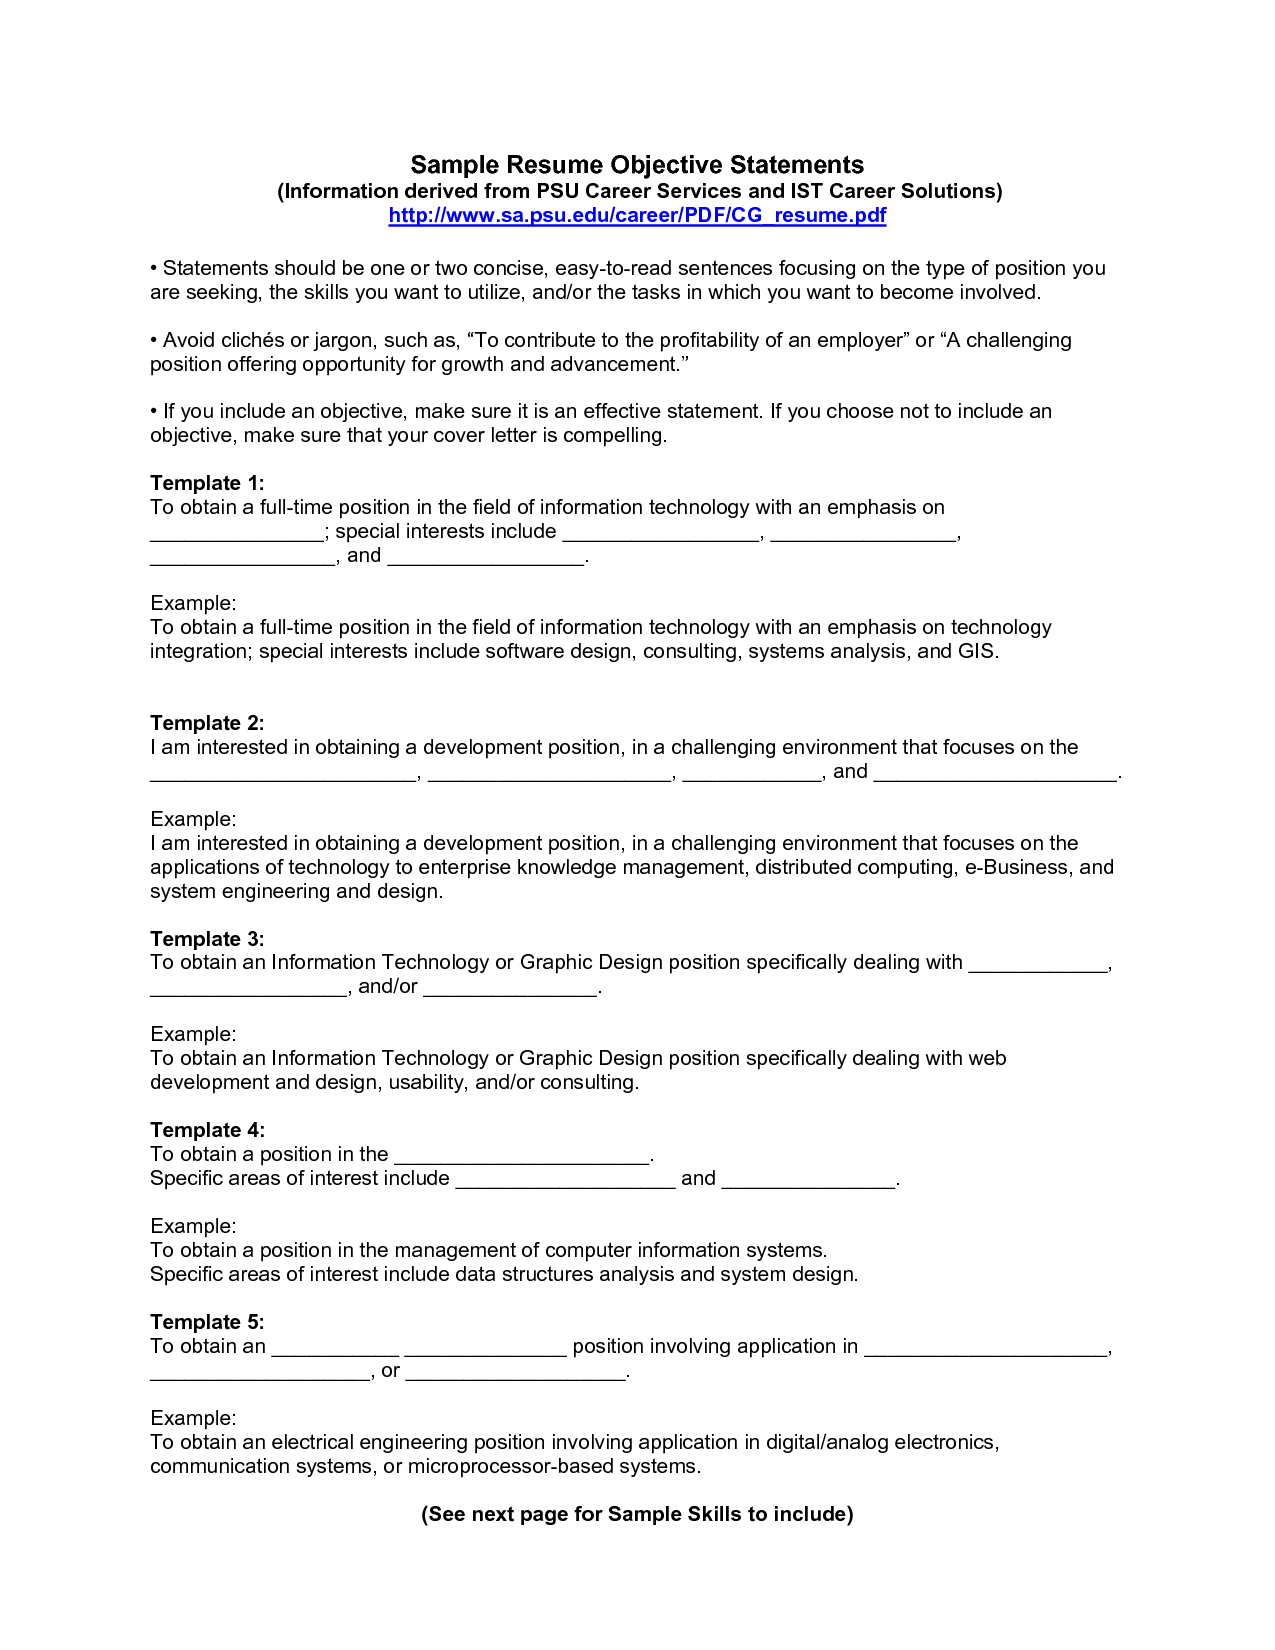 Examples Of Objectives For Resumes Resume Objective Statement 4 examples of objectives for resumes|wikiresume.com